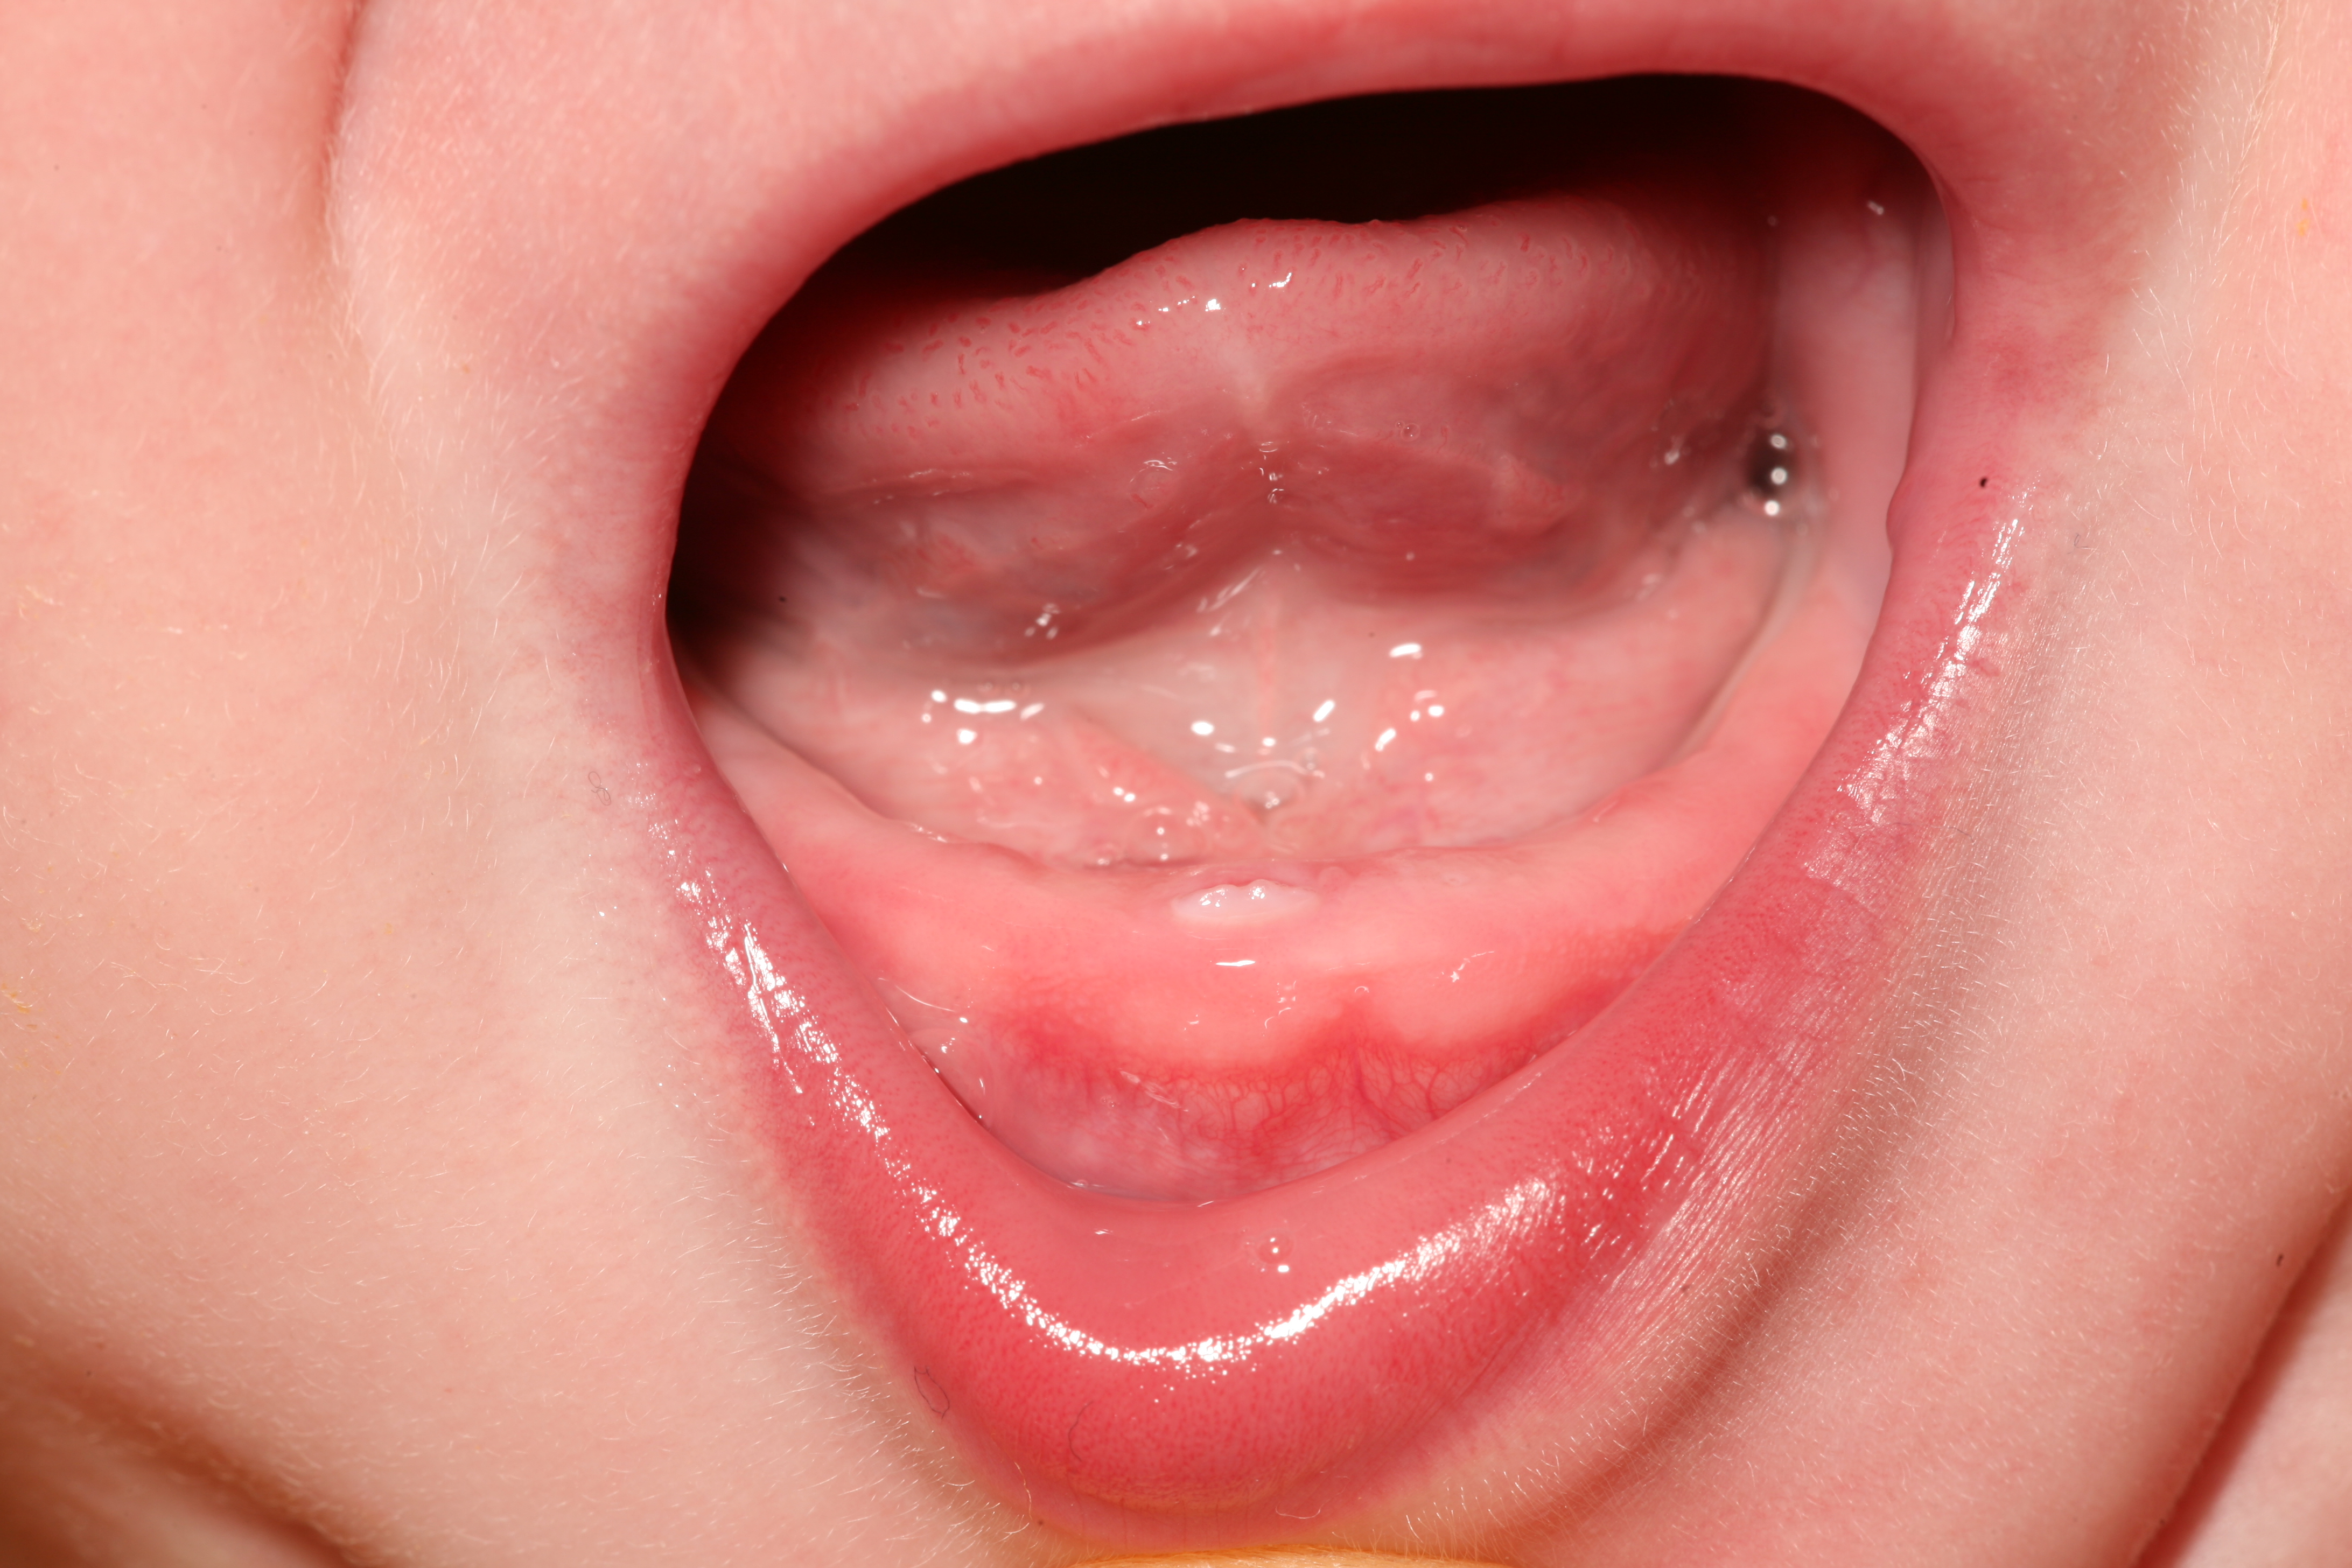 Teething baby: lower right incisor penetrating the oral mucosa.